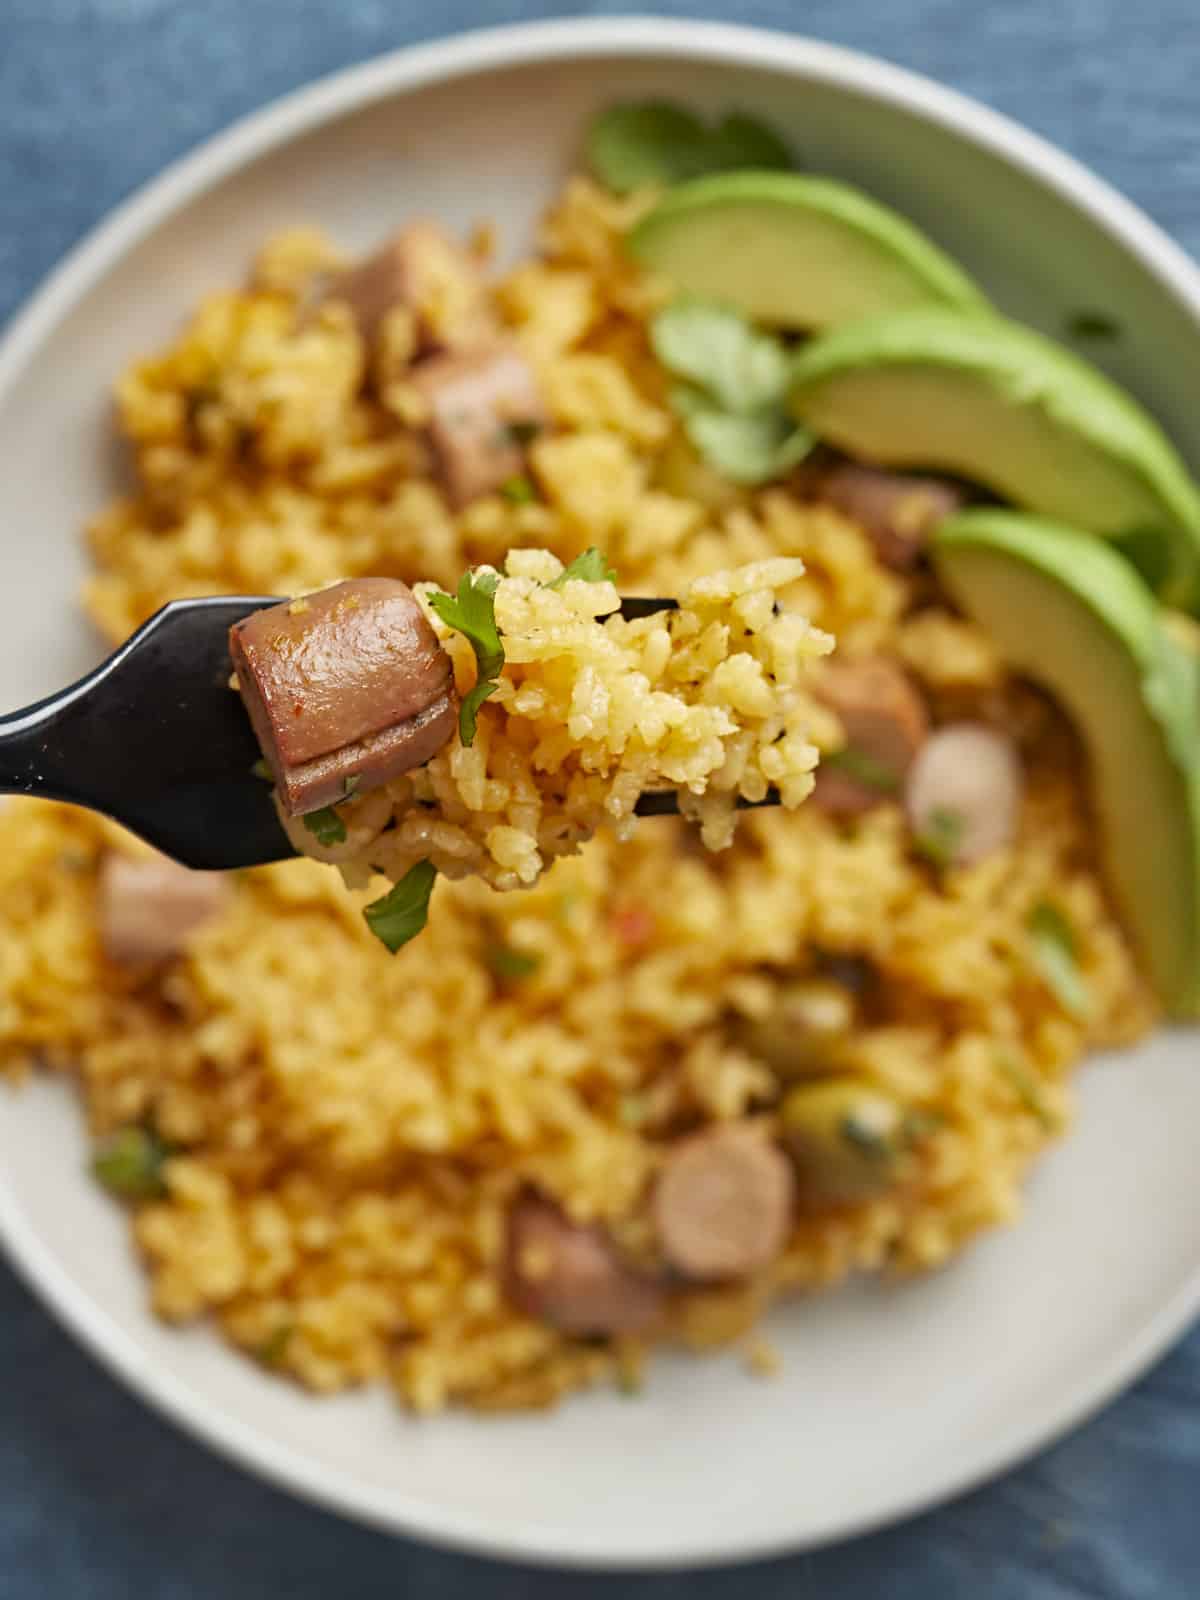 Overhead shot of Arroz Con Salchichas on a plate in the background with a fork holding some in the foreground.